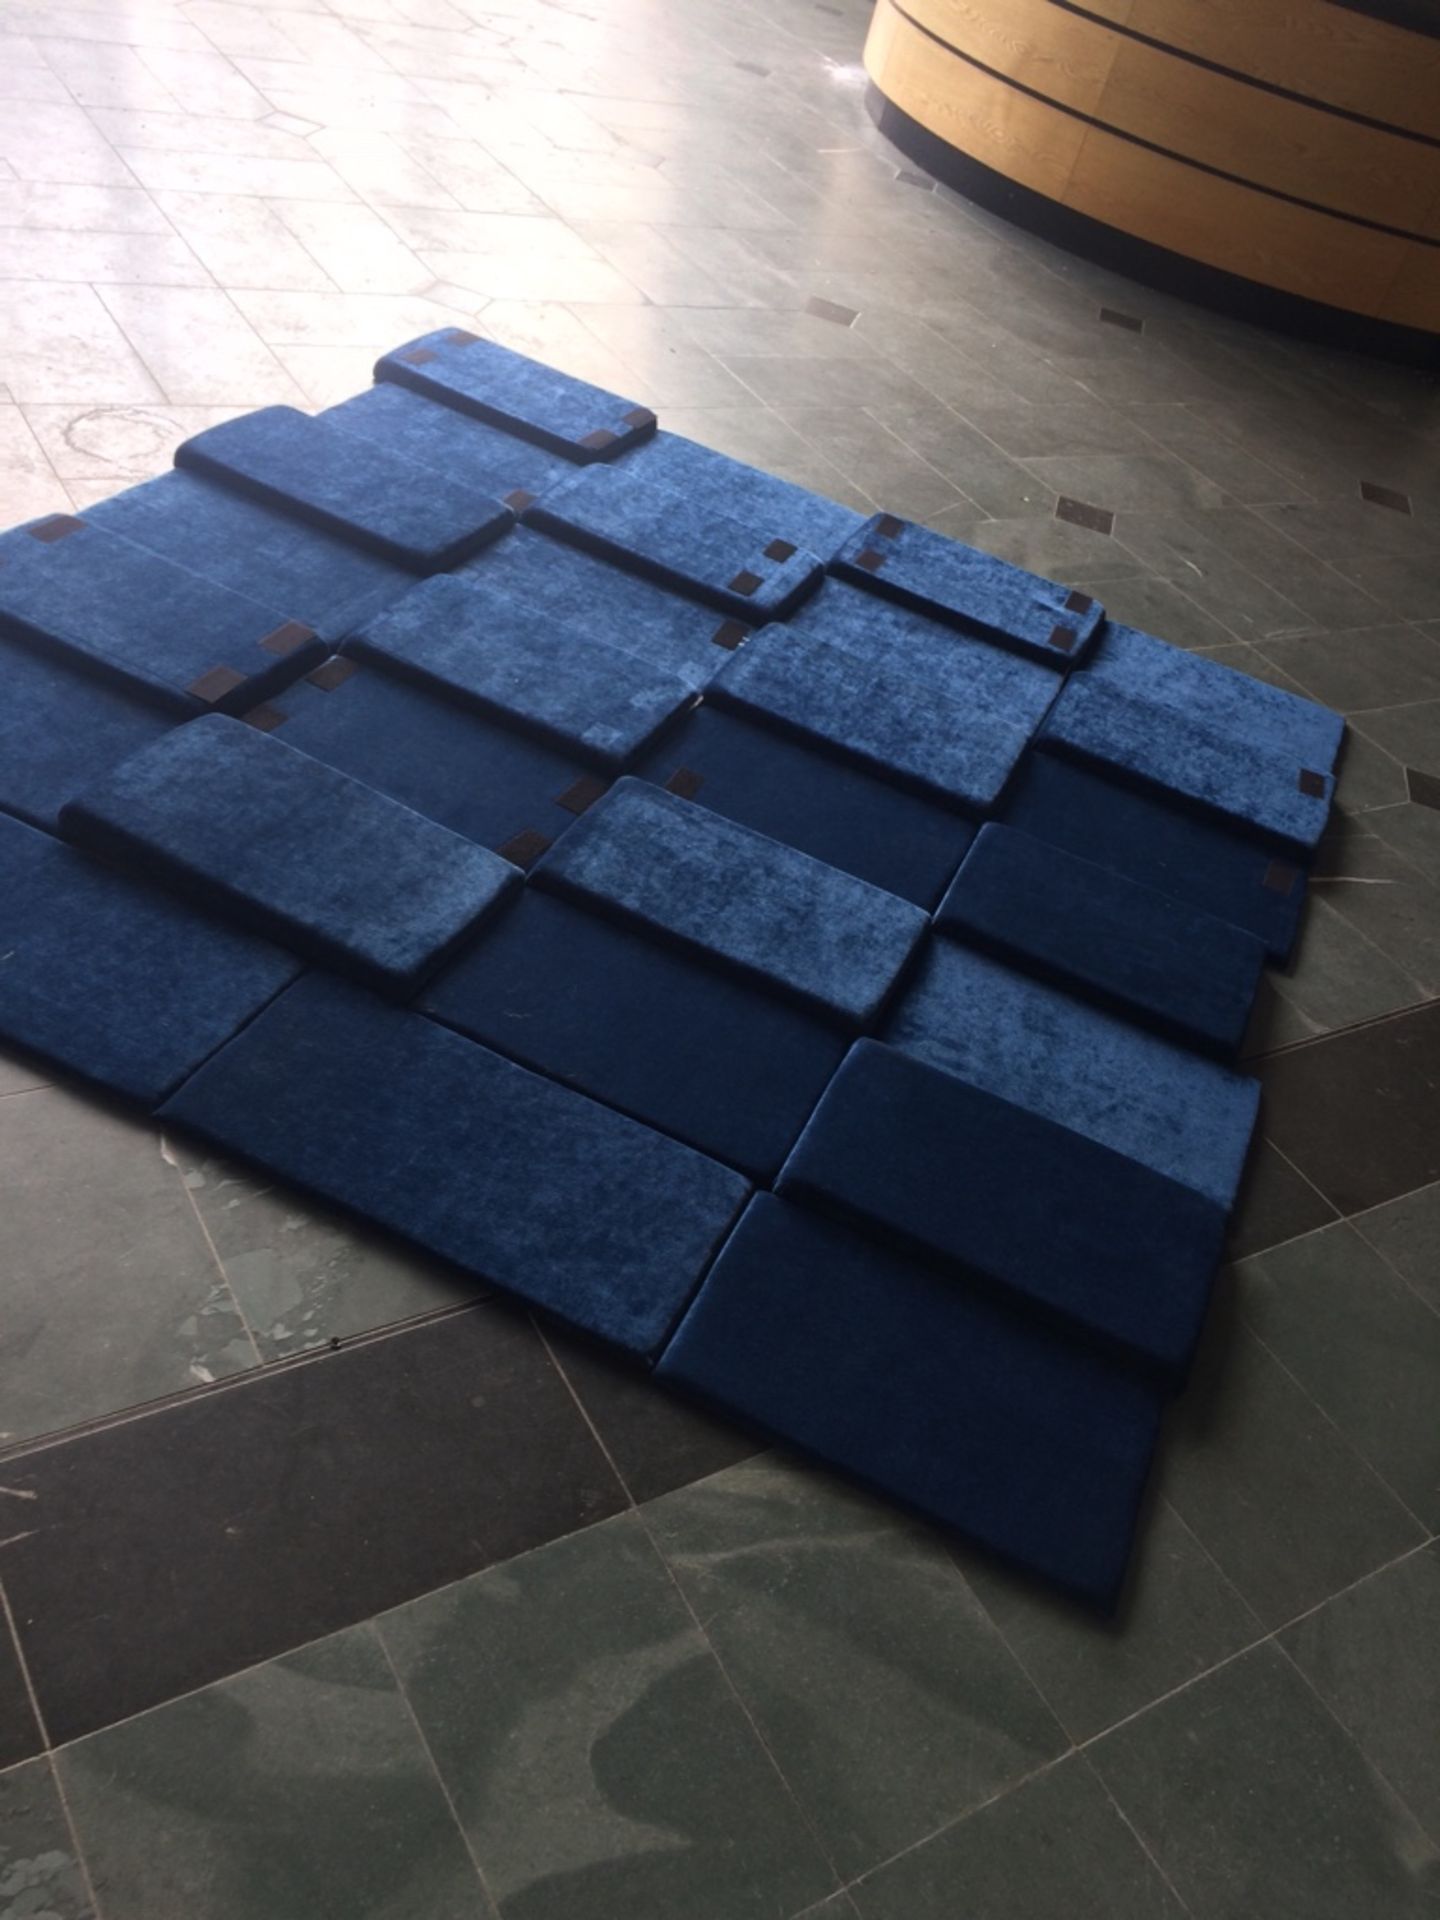 Velvet Wall Cladding Panels Previously Used On Entrance Hall Feature Wall Velcro Fixes To Any Wall - Image 3 of 5